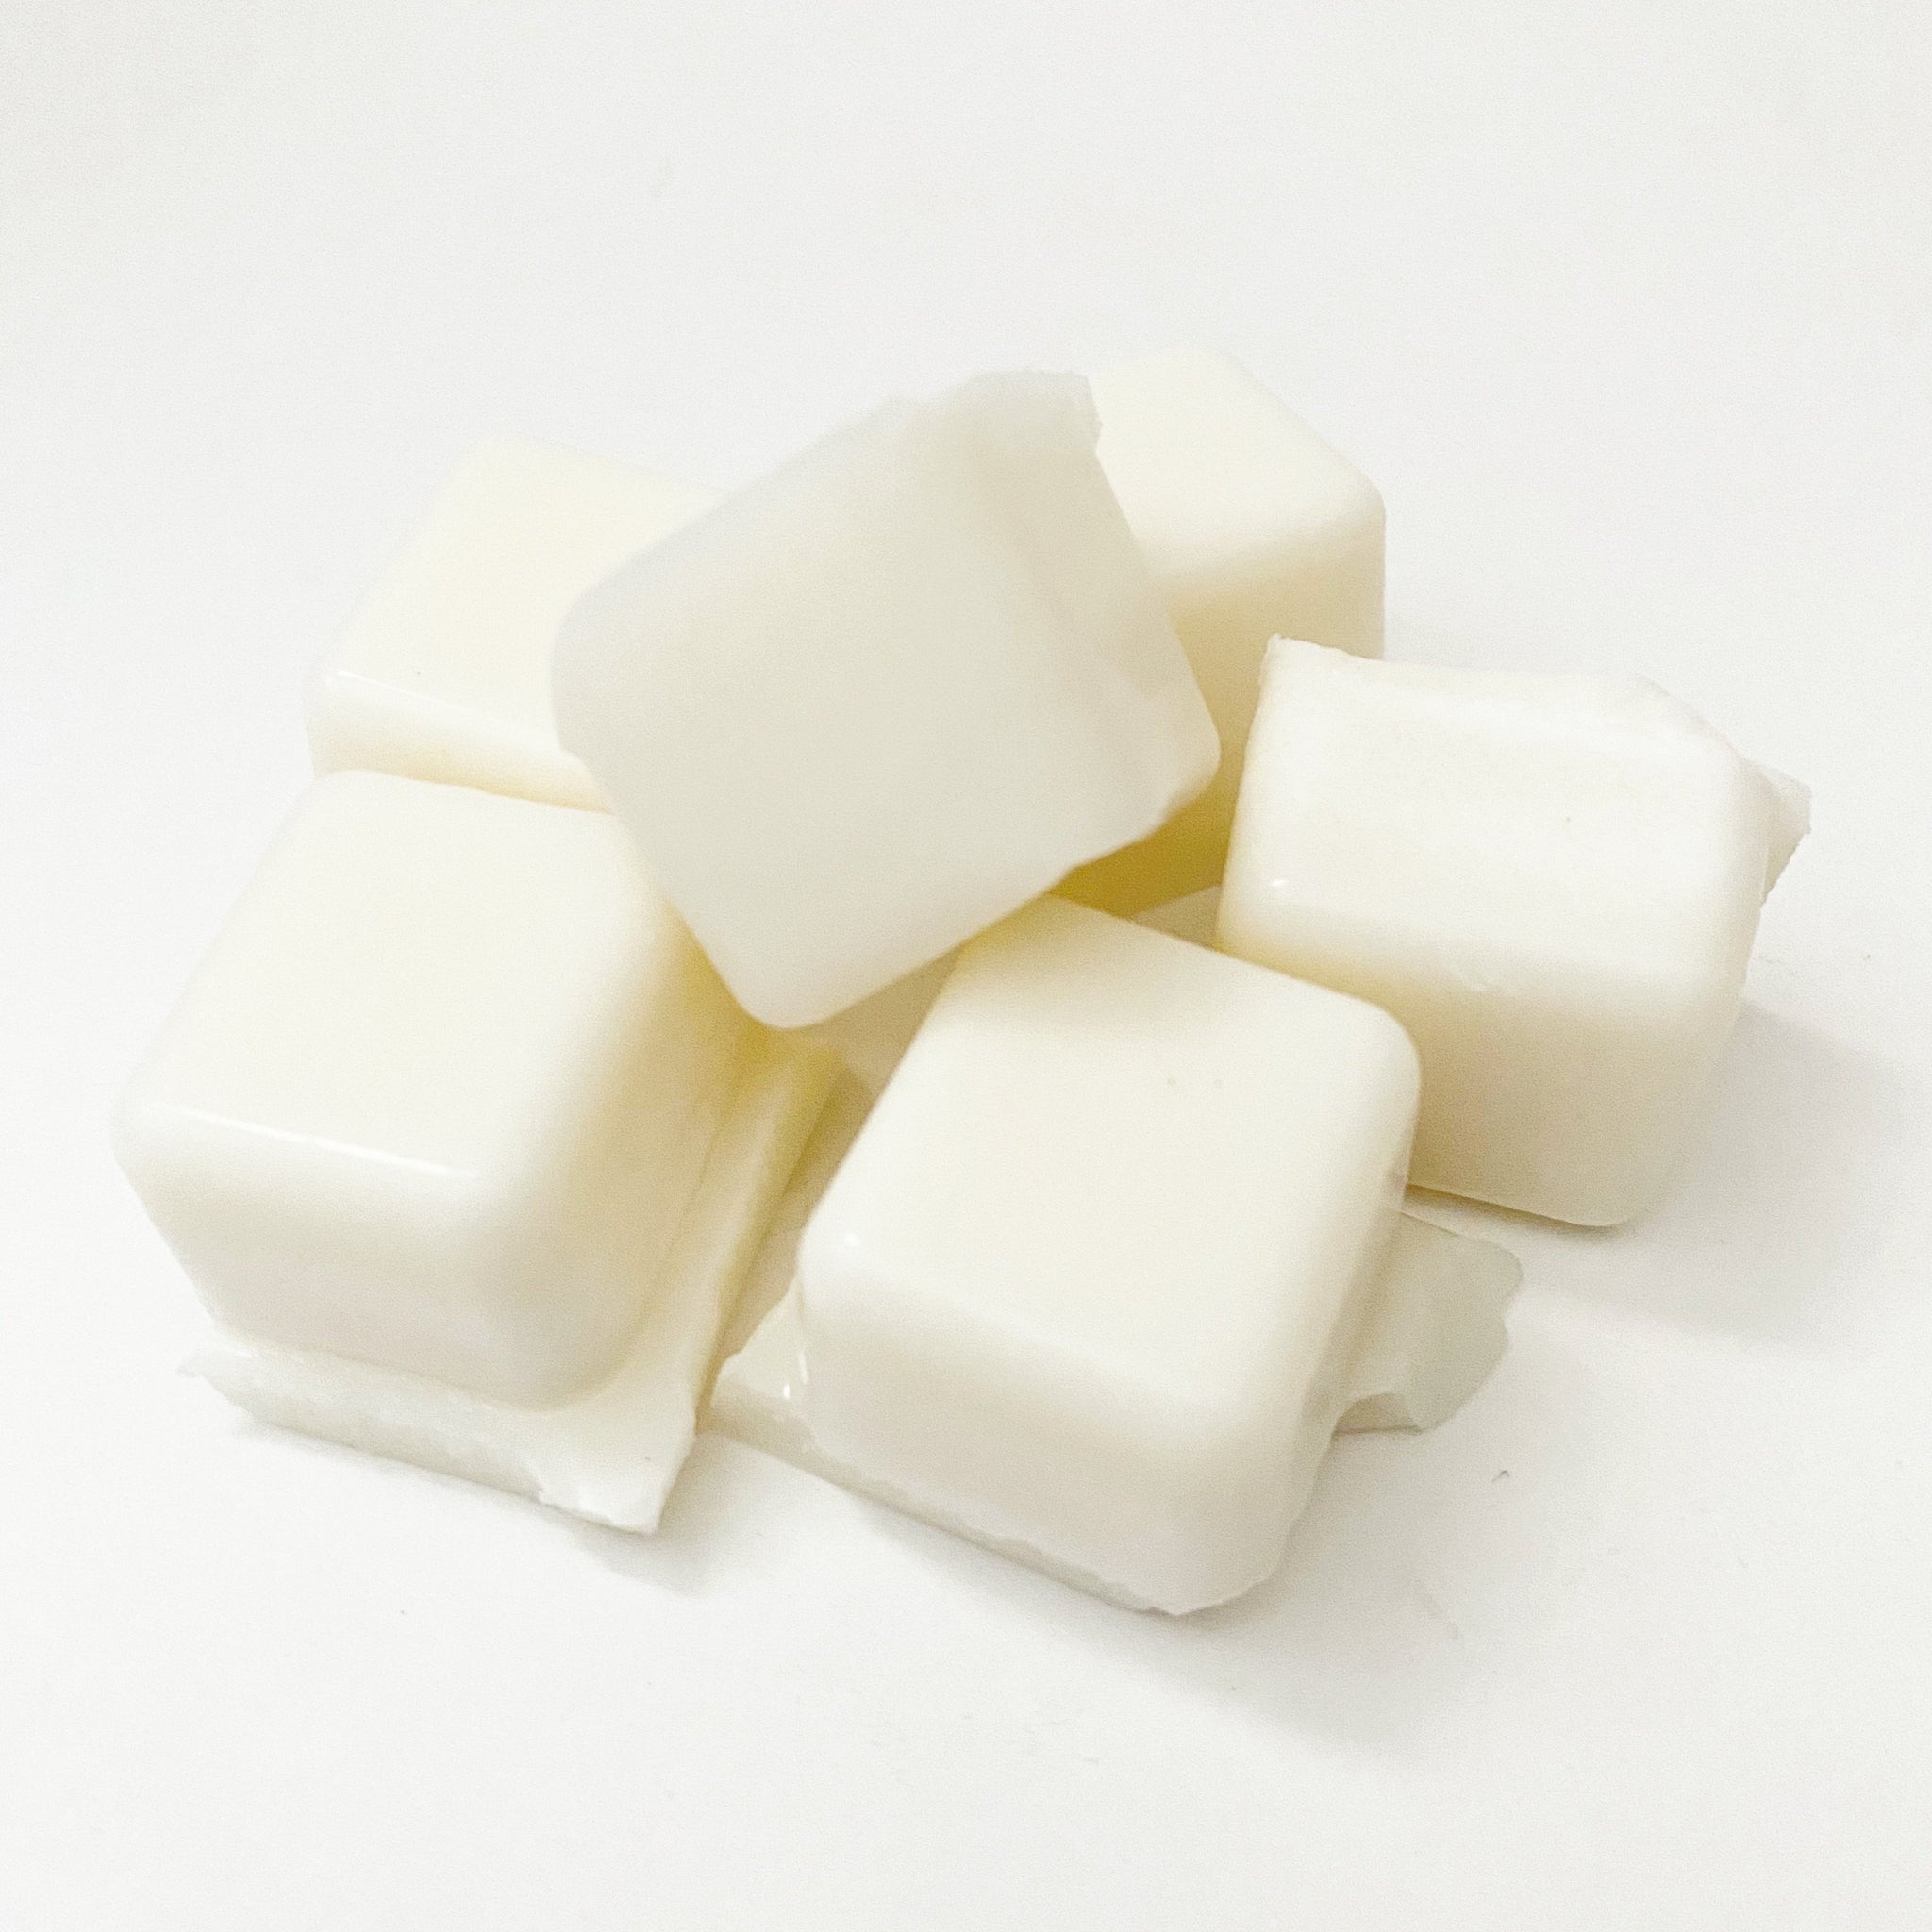 Soy Wax Melts – adourn